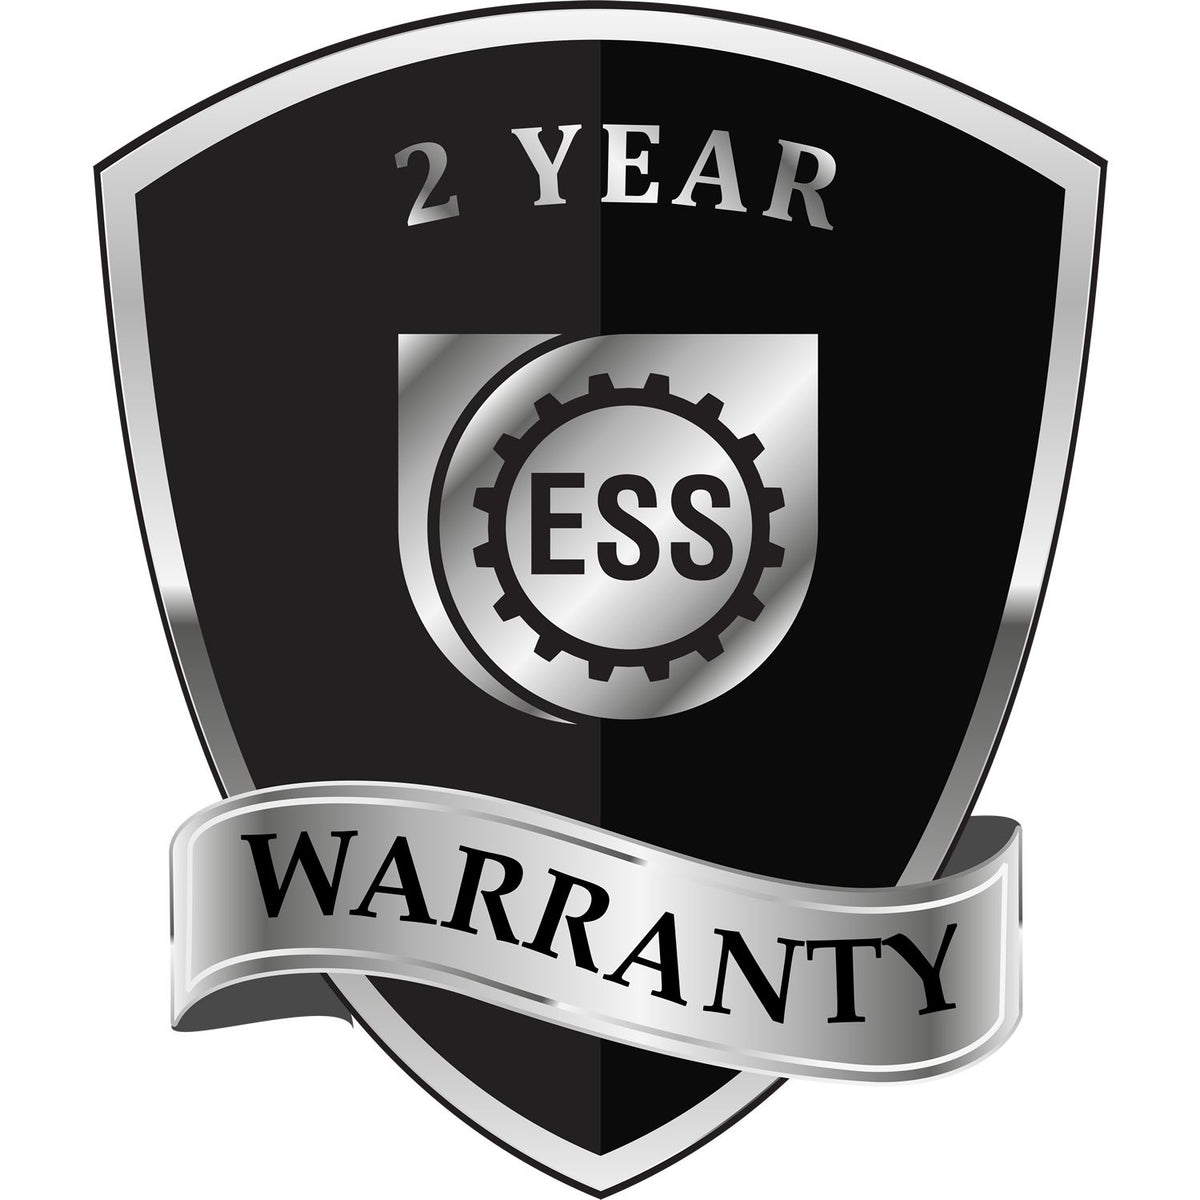 A badge or emblem showing a warranty icon for the State of Connecticut Architectural Seal Embosser